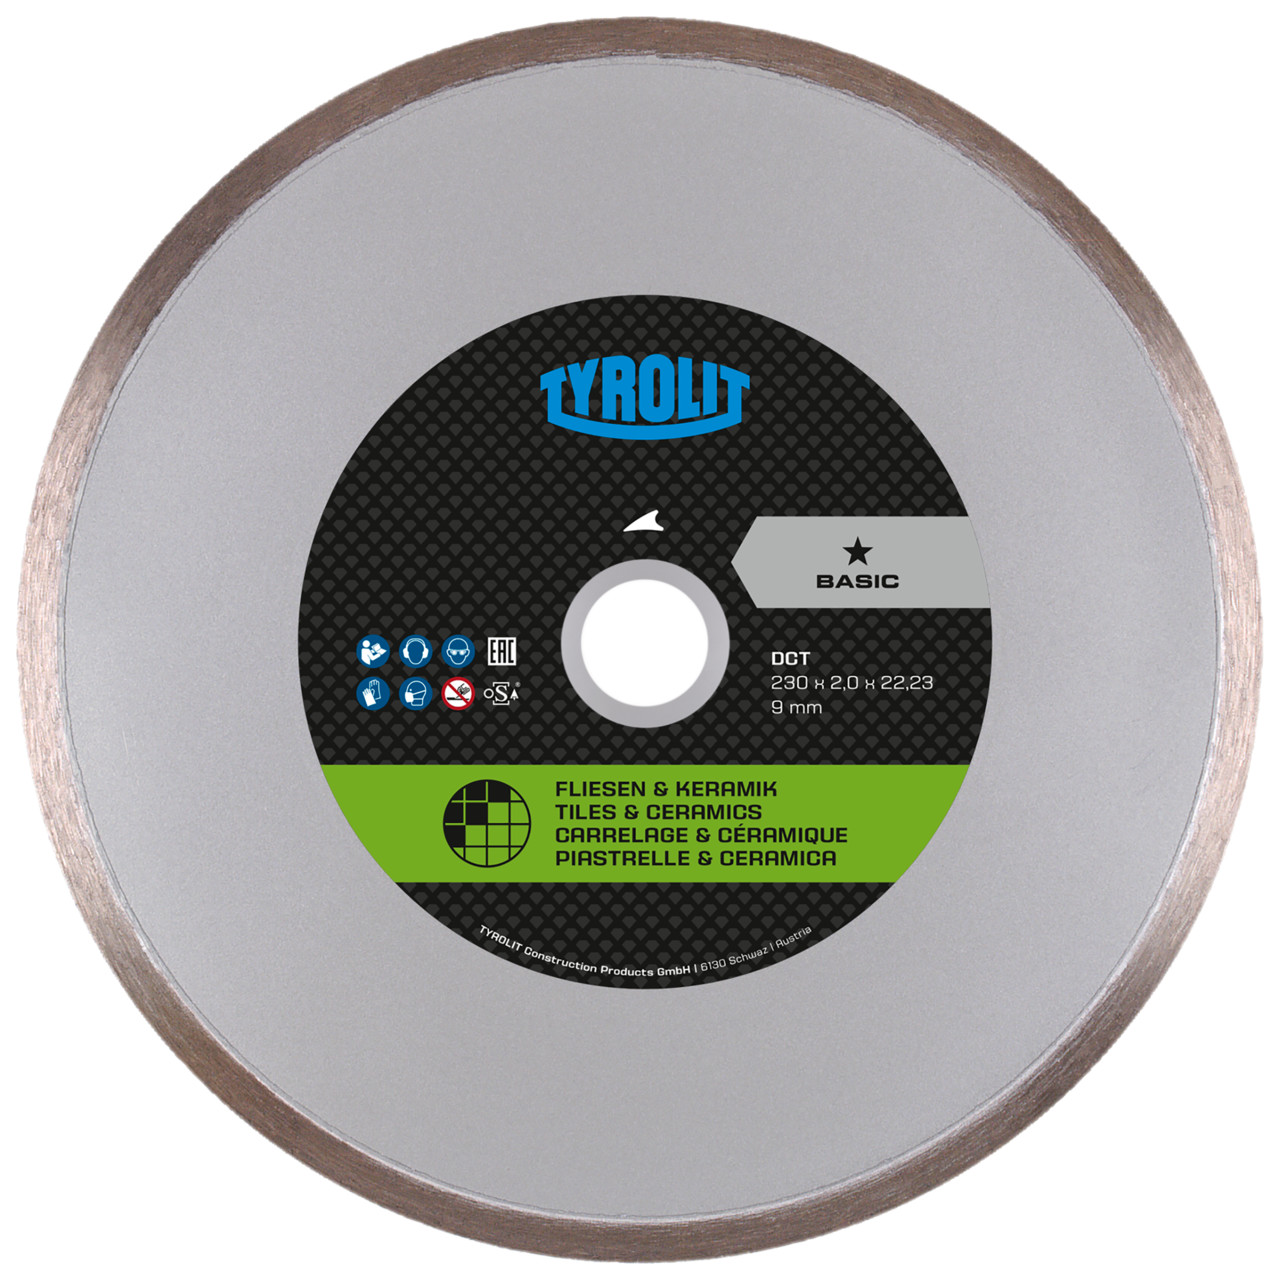 TYROLIT dry-cutting saw blades DxDxH 125x1.6x22.23 DCT, shape: 1A1R (cut-off wheel with continuous cutting wheel), Art. 475980